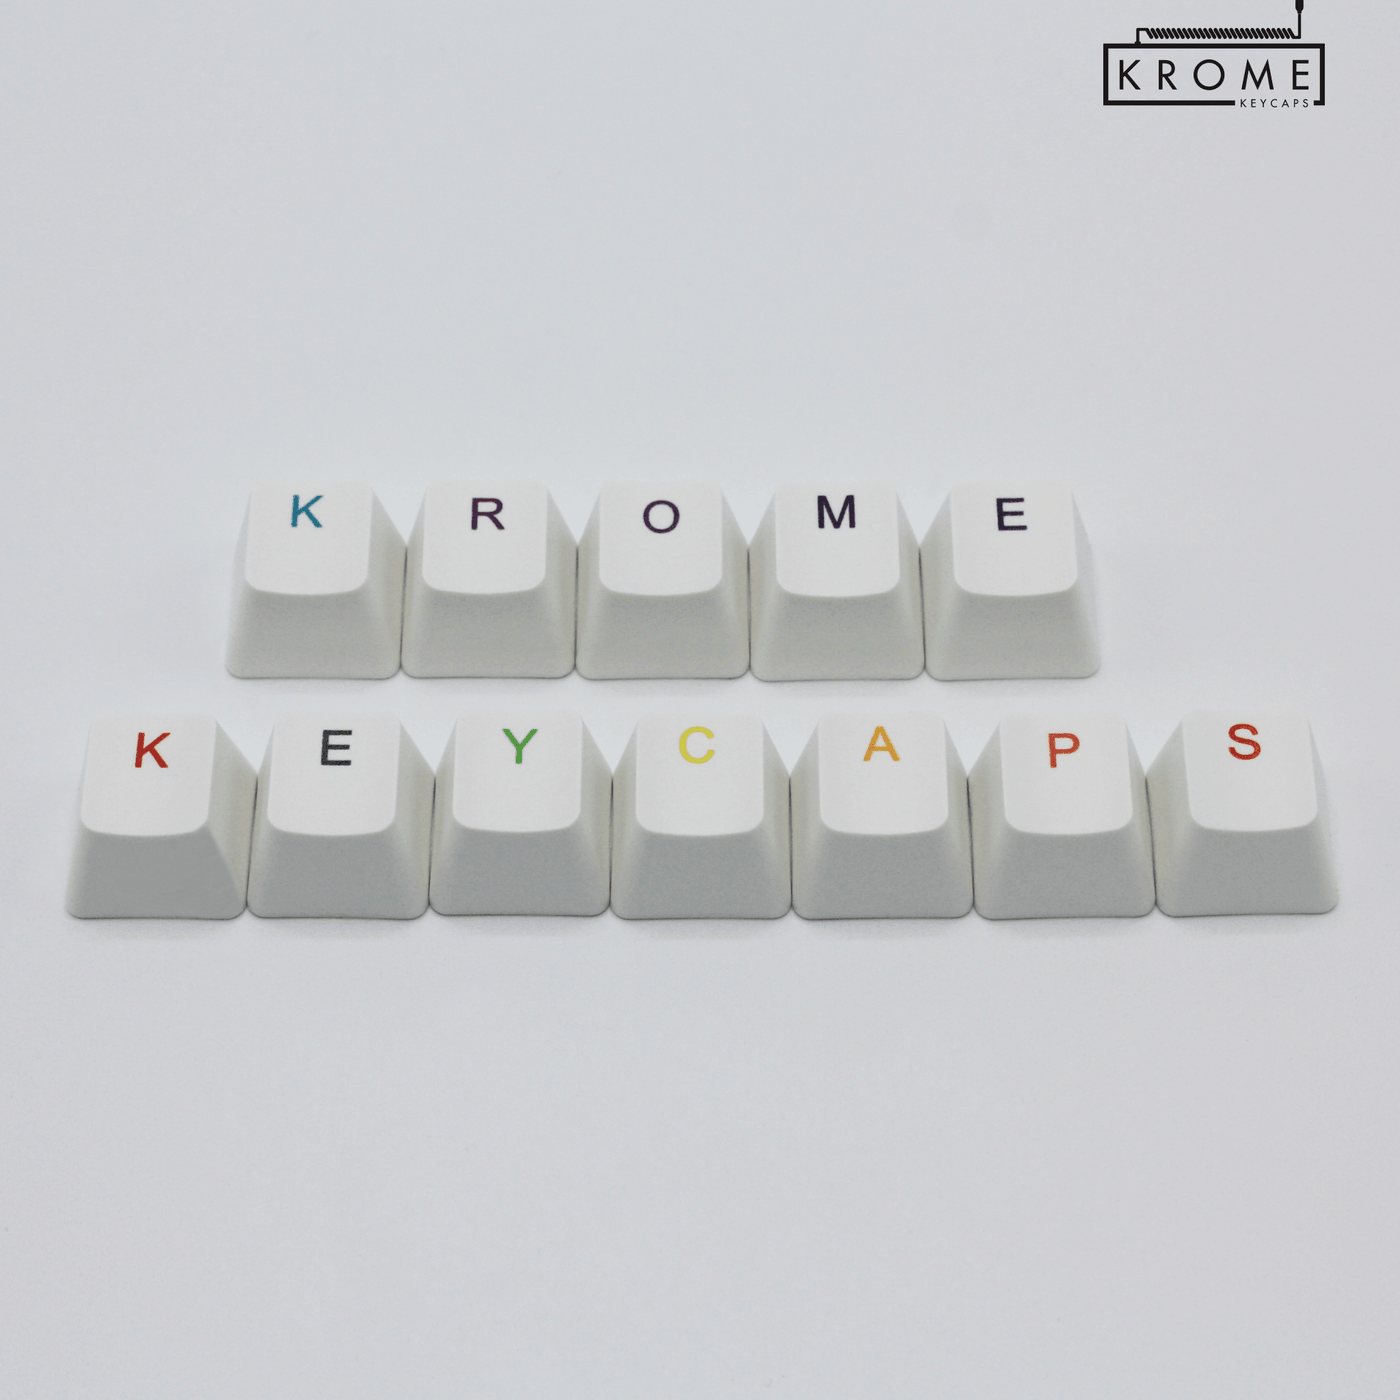 Customise Your Own PBT Keycaps - Any Row